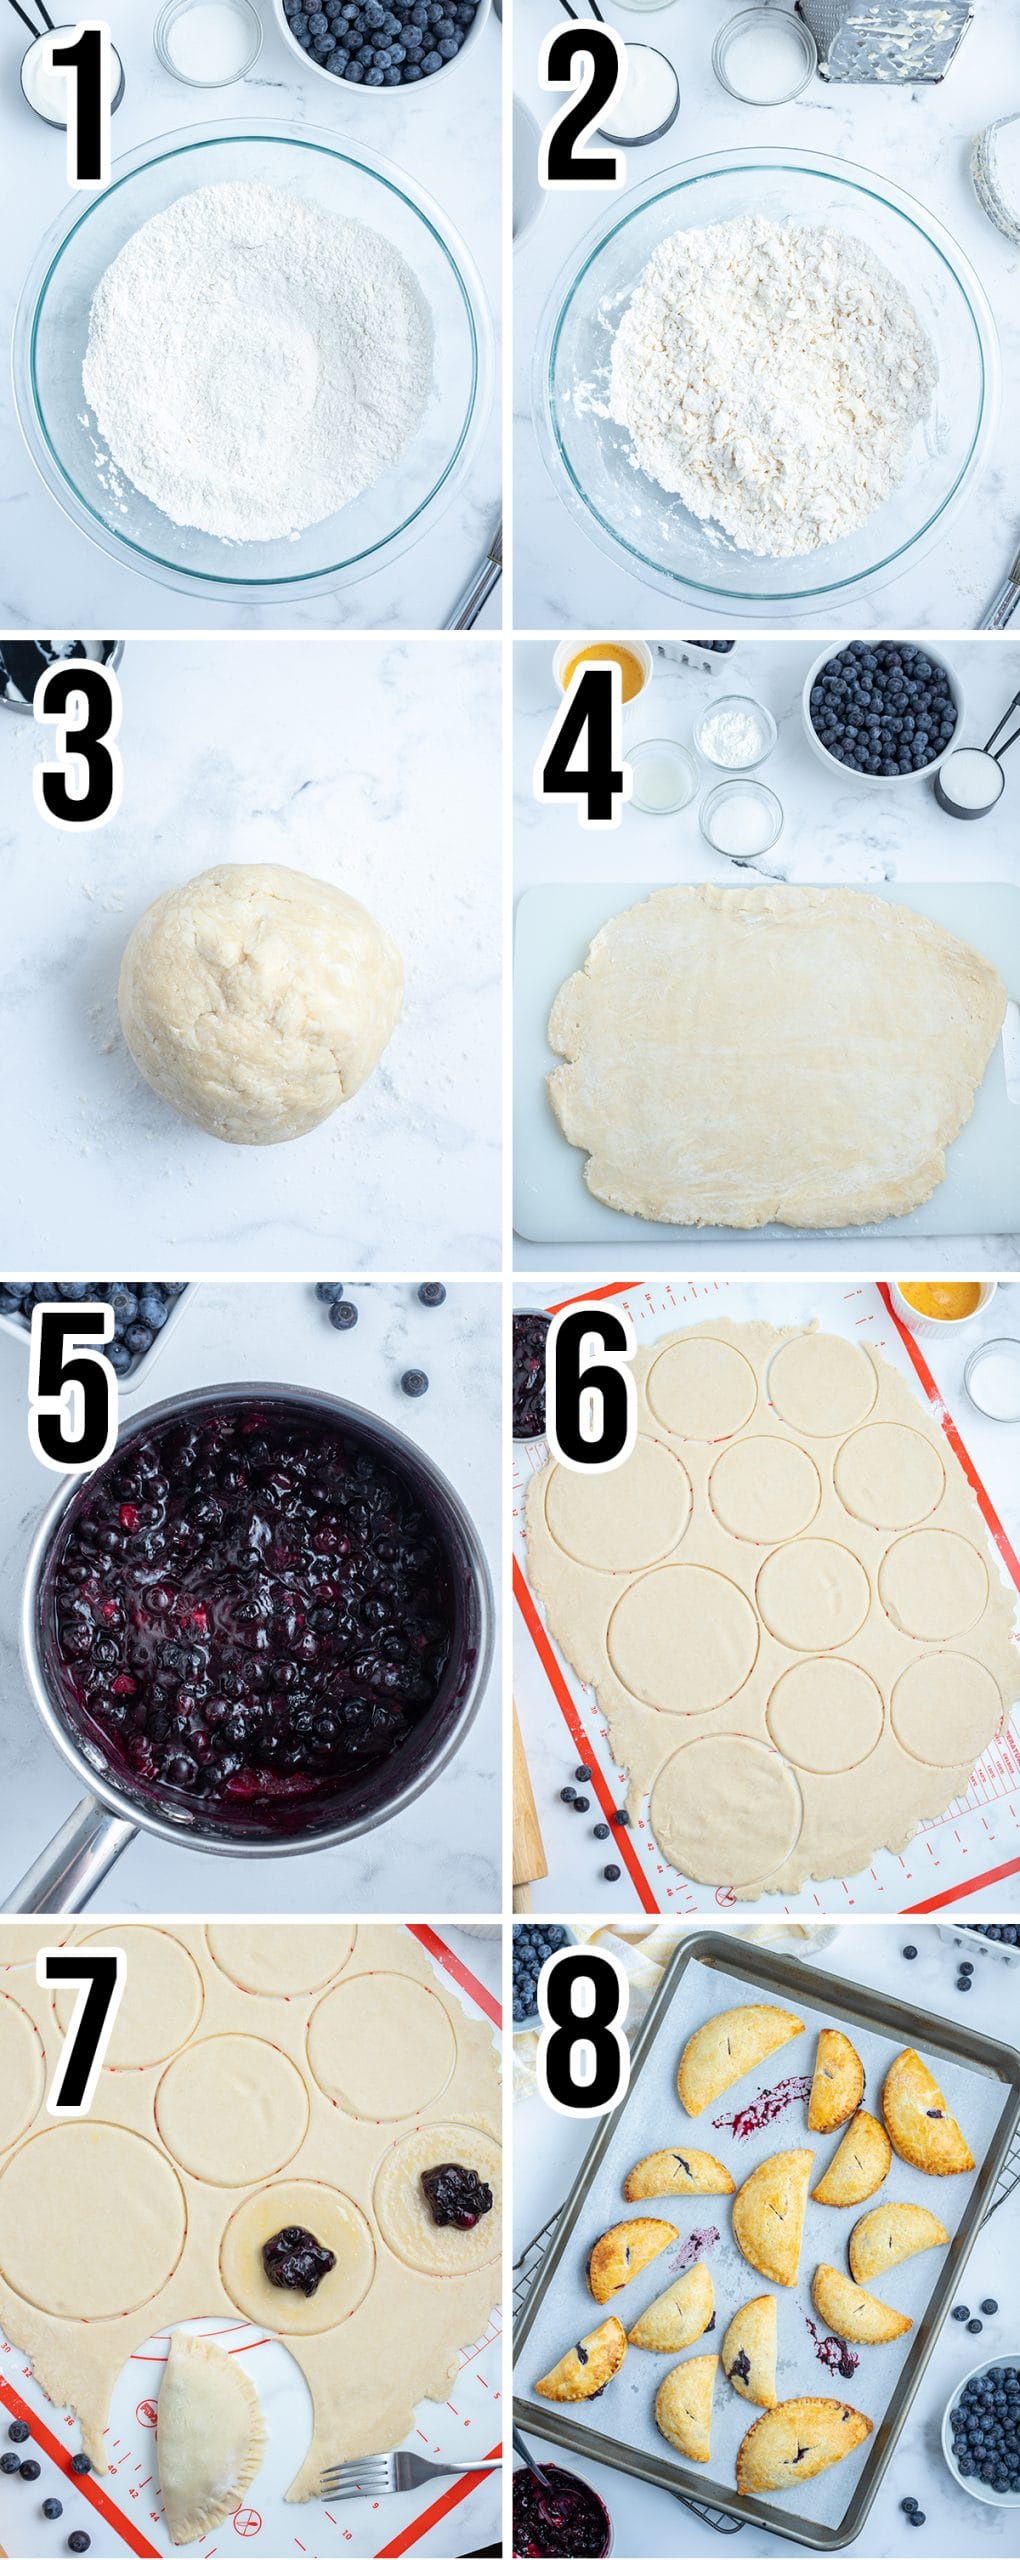 A collage of 8 photos showing the steps of how to make blueberry hand pies.